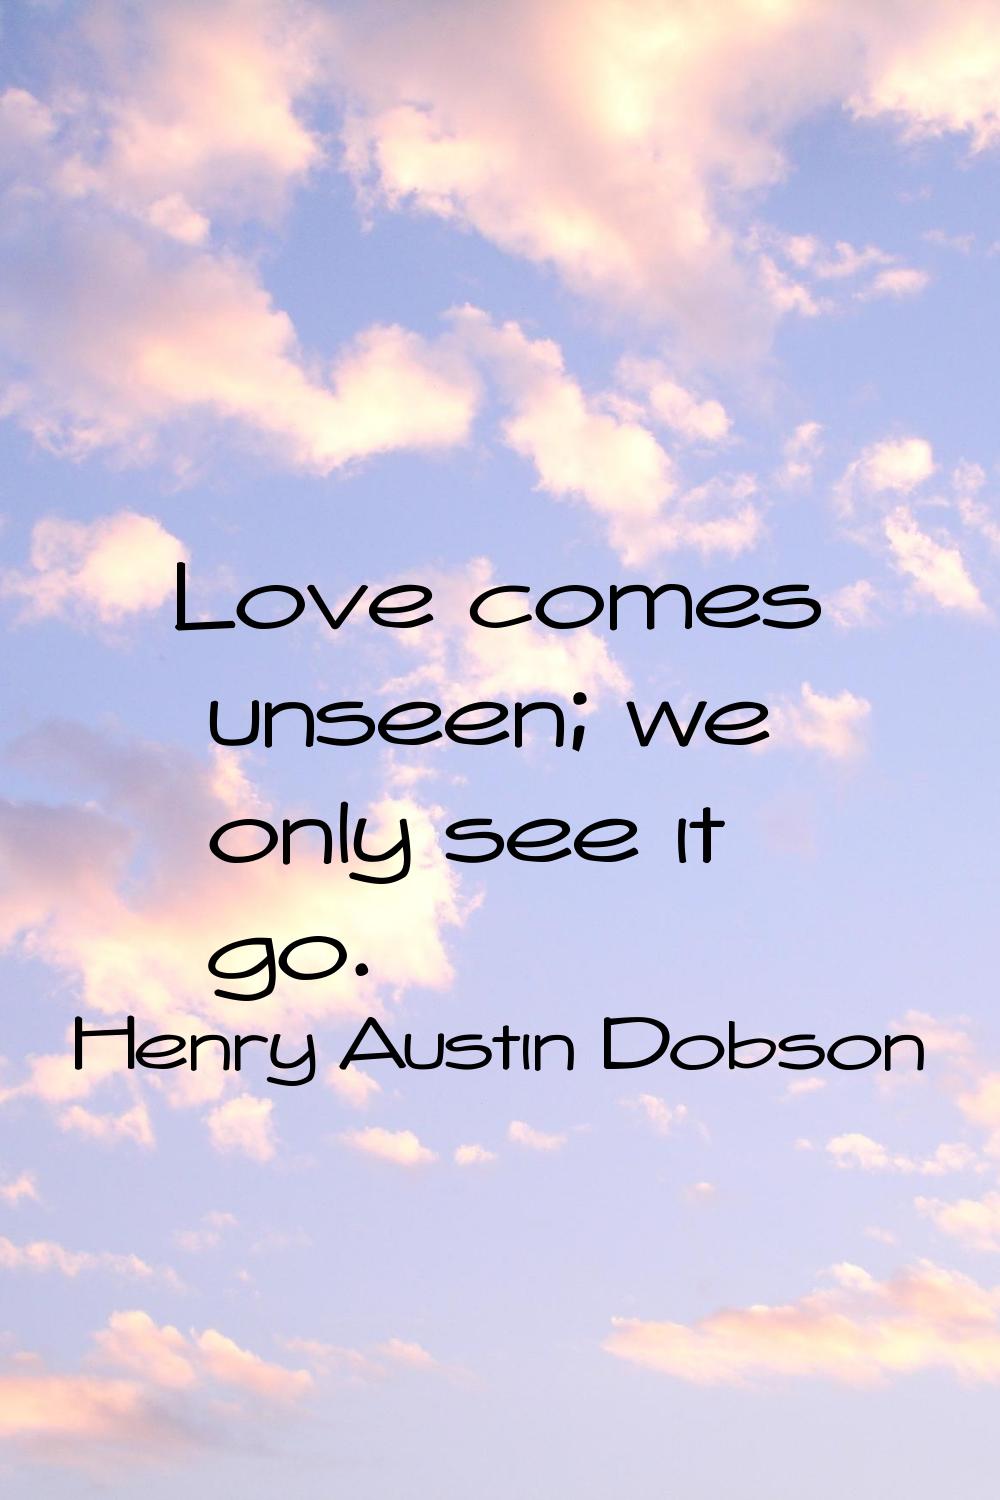 Love comes unseen; we only see it go.